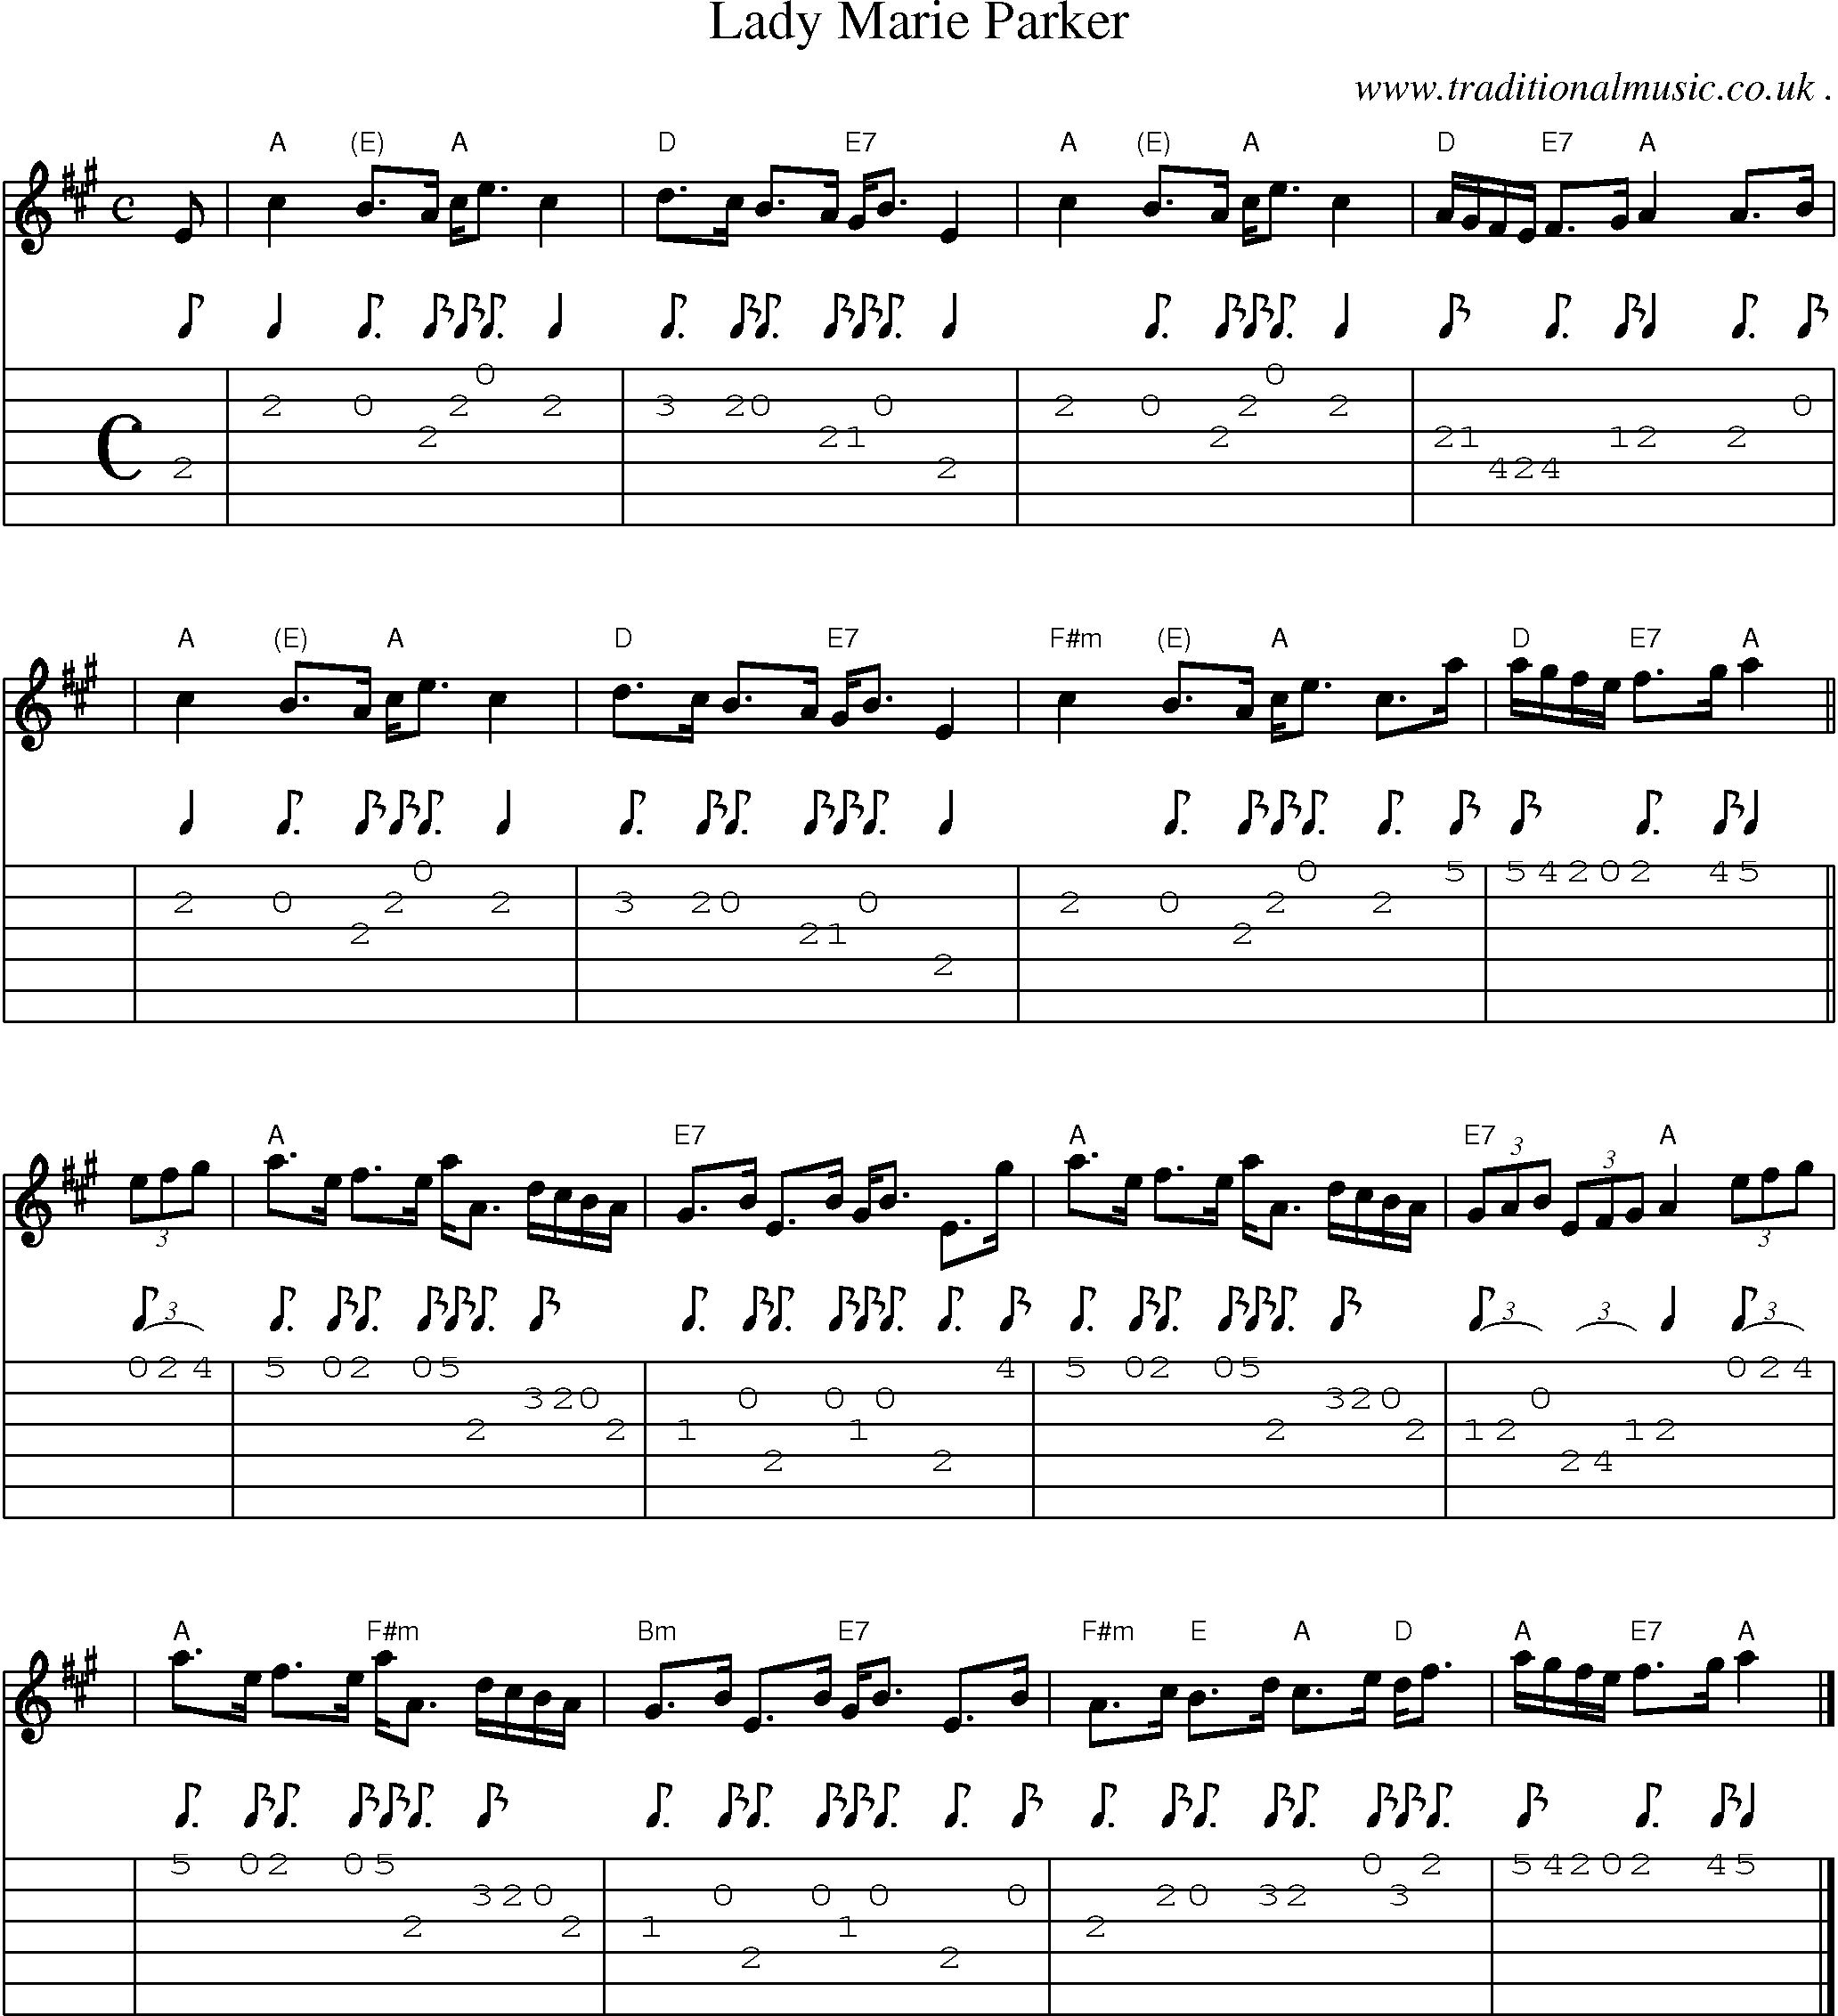 Sheet-music  score, Chords and Guitar Tabs for Lady Marie Parker